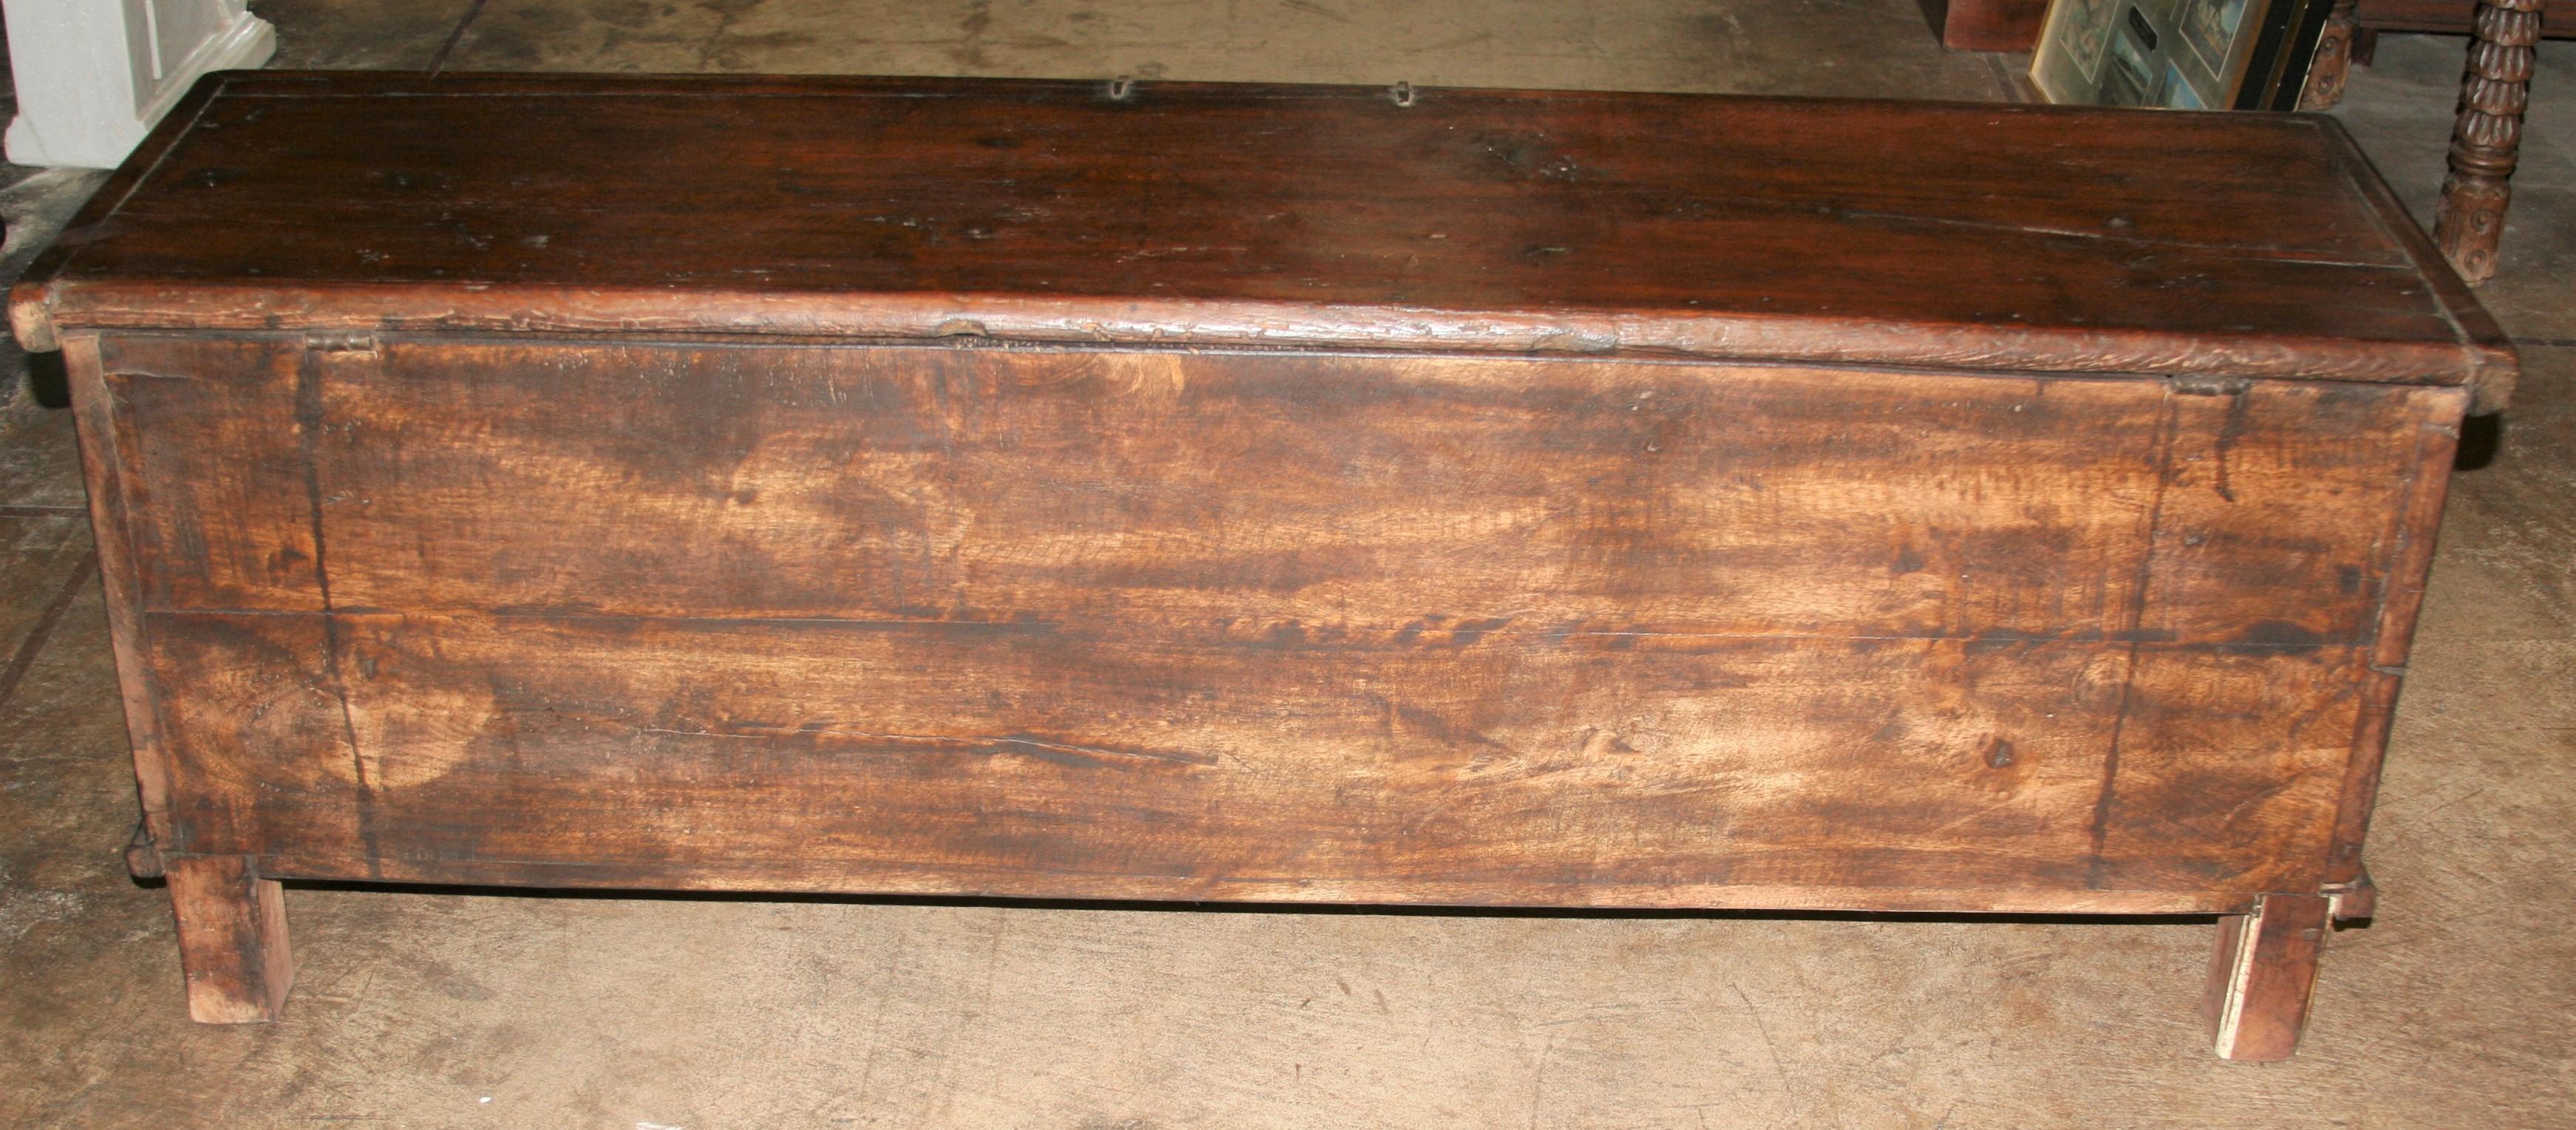 19th Century Solid Teak Wood Dowry Chest Modified as Storage Bench for Bed For Sale 5